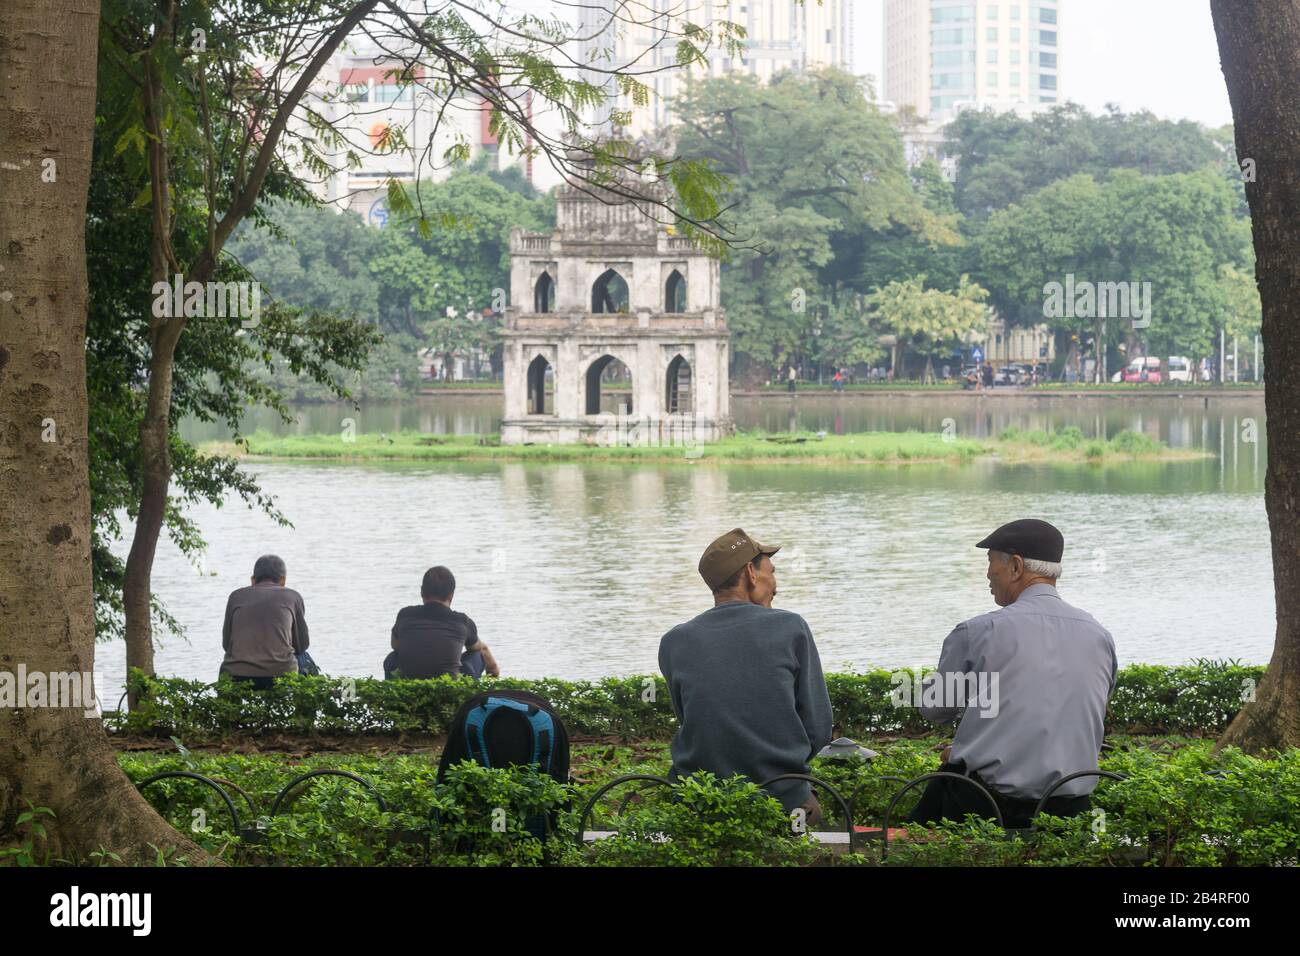 Hanoi Turtle Tower - People chatting near Hoan Kiem Lake in Hanoi with Turtle Tower in the background. Vietnam, Southeast Asia. Stock Photo